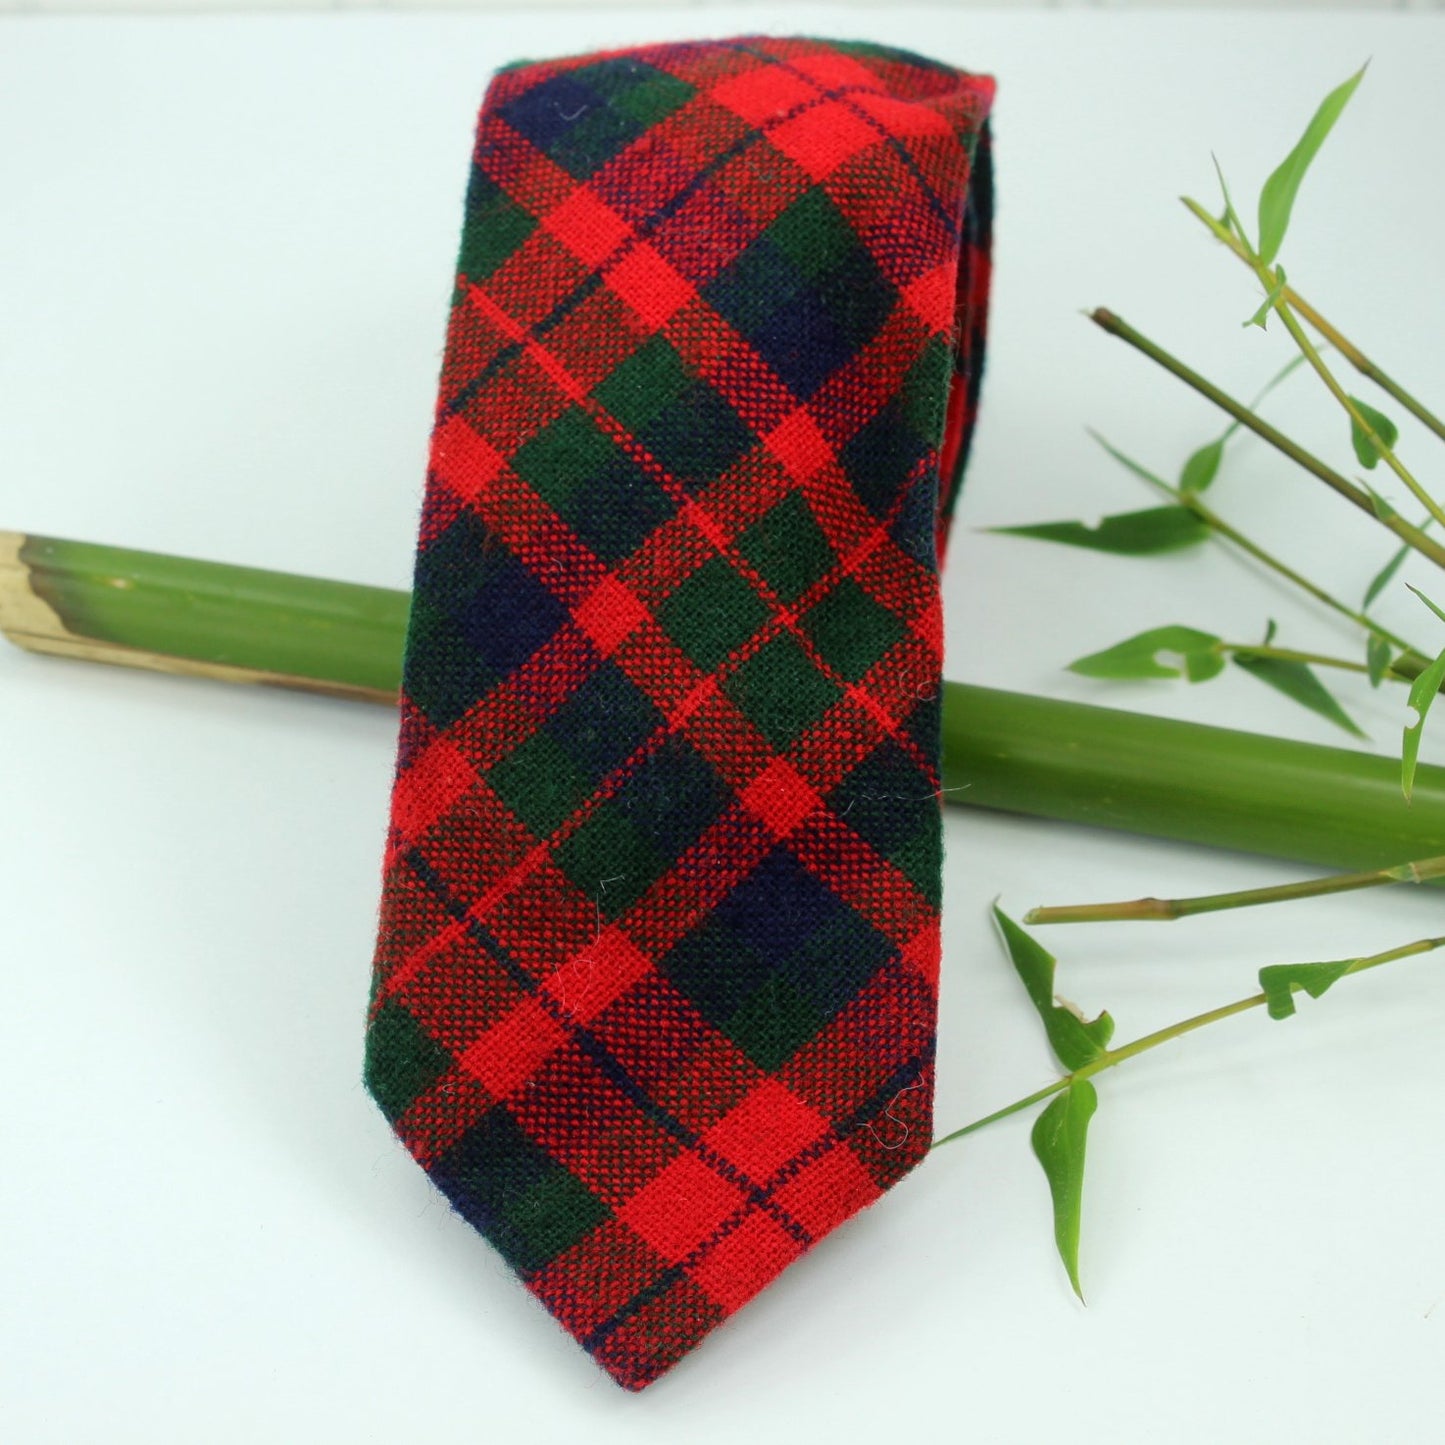 Mark Seven Dralon Skinny Necktie Red Navy Forest Green Plaid 52" X 2 1/4" 1950s 60s pointed end design